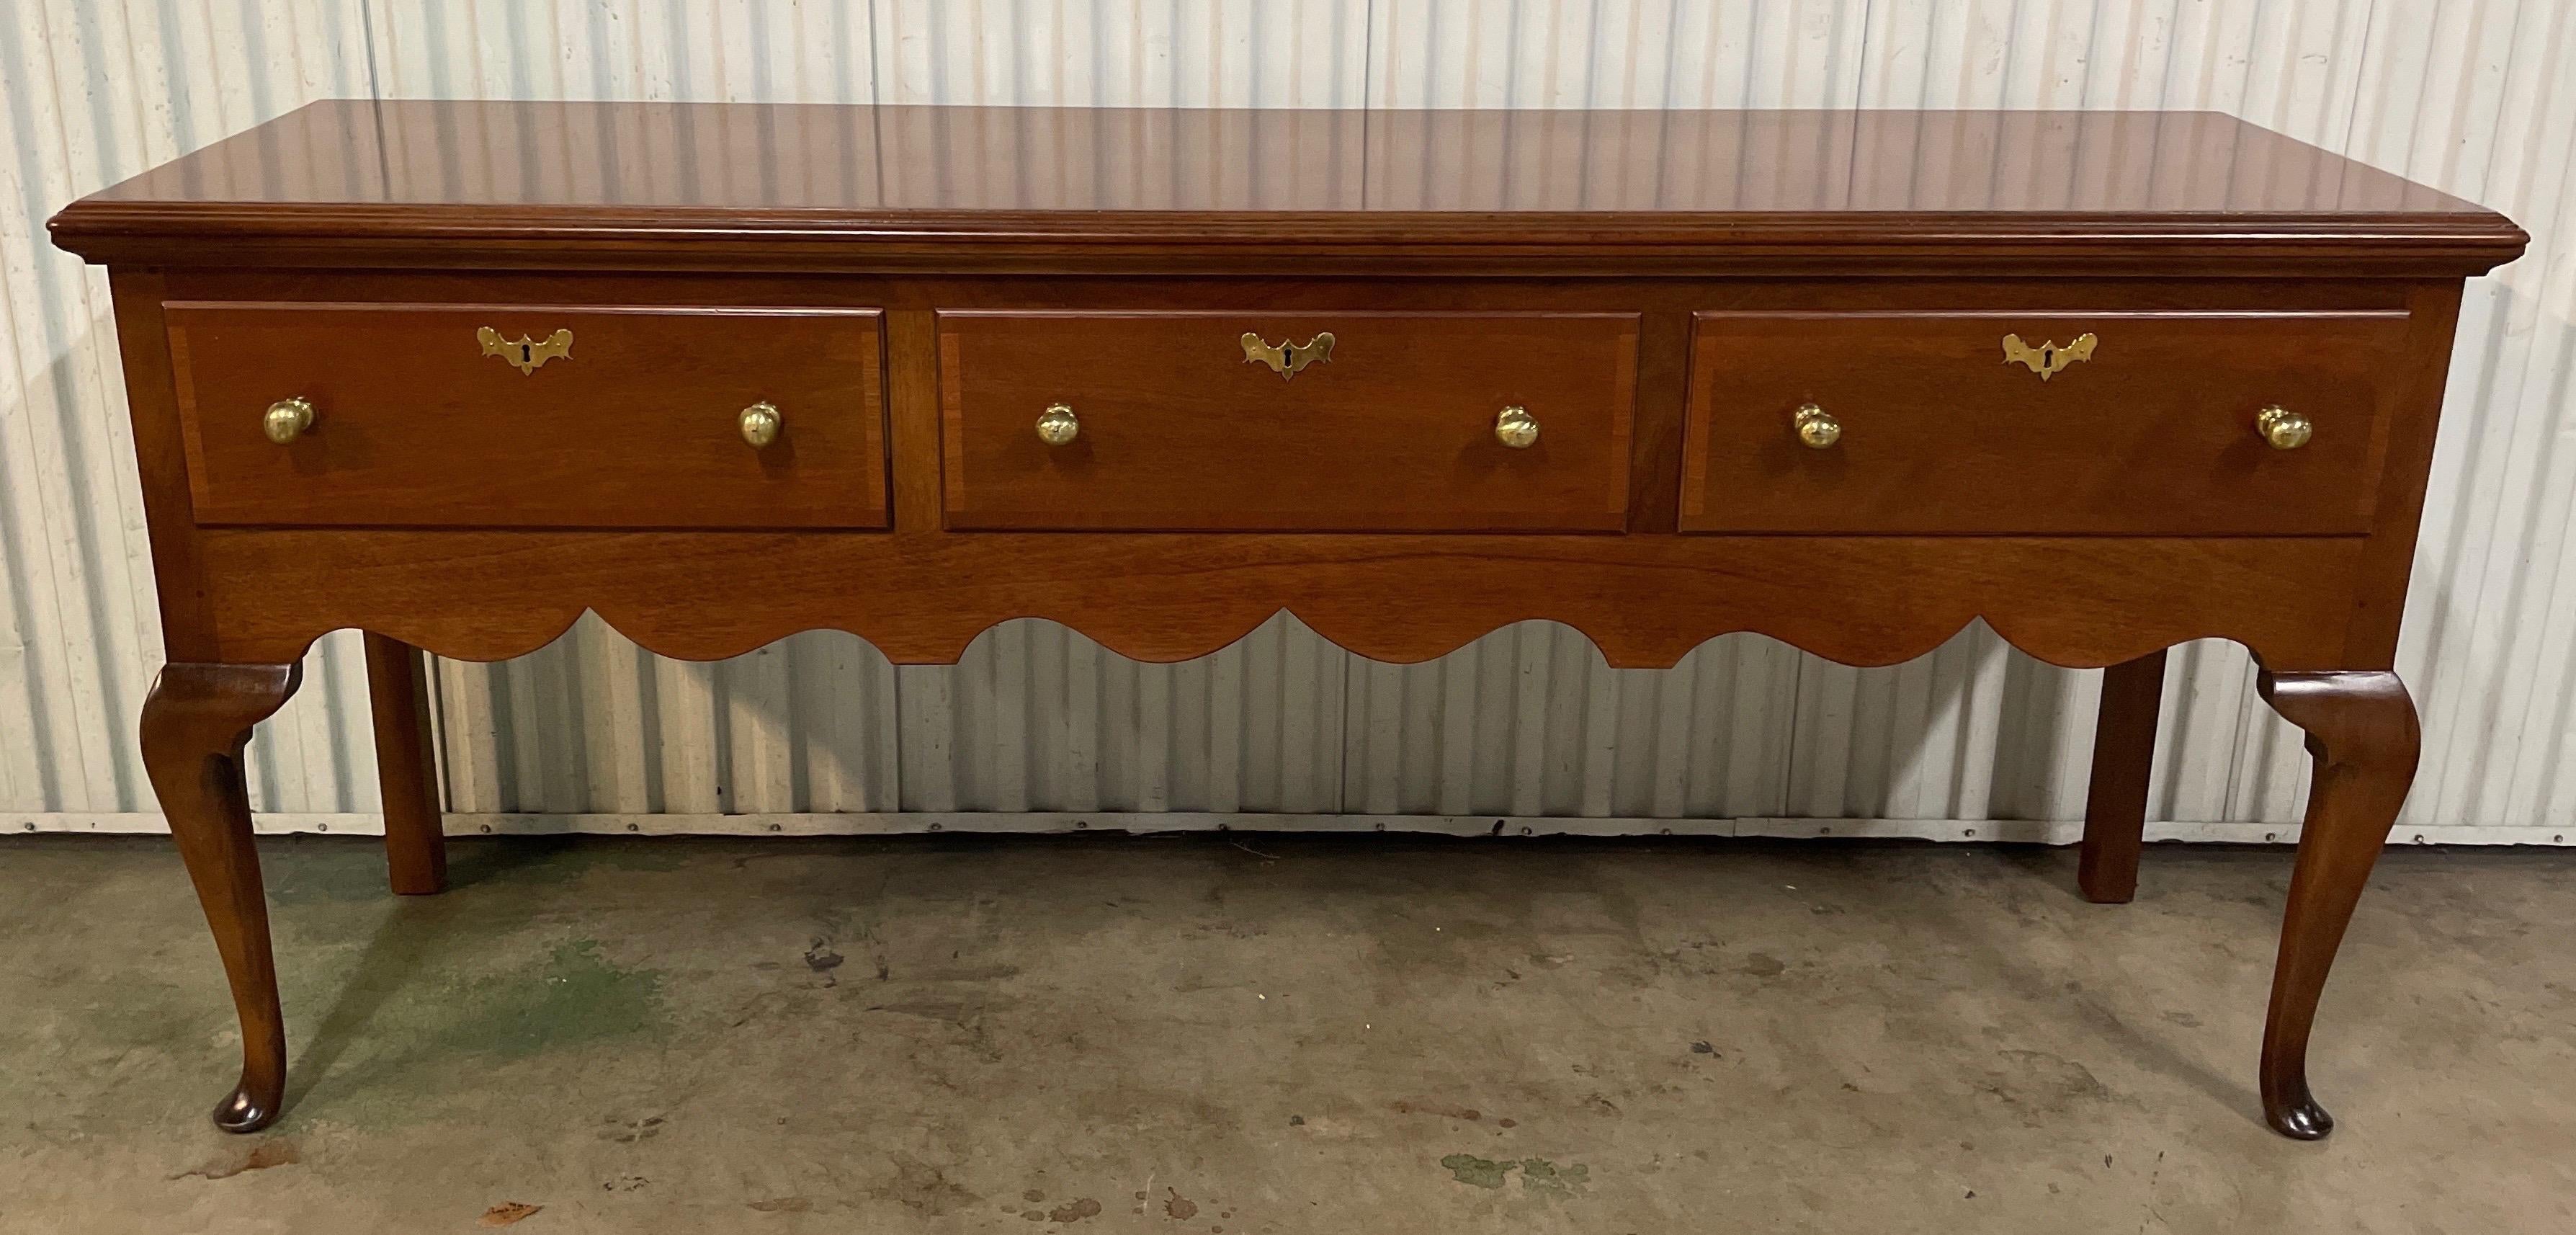 Hand crafted sideboard / buffet by Kittinger furniture company. This piece has three ample drawers with large brass pulls. The scalloped edge gives it a less formal look. This is a limited-edition piece made in conjunction with the Williamsburg